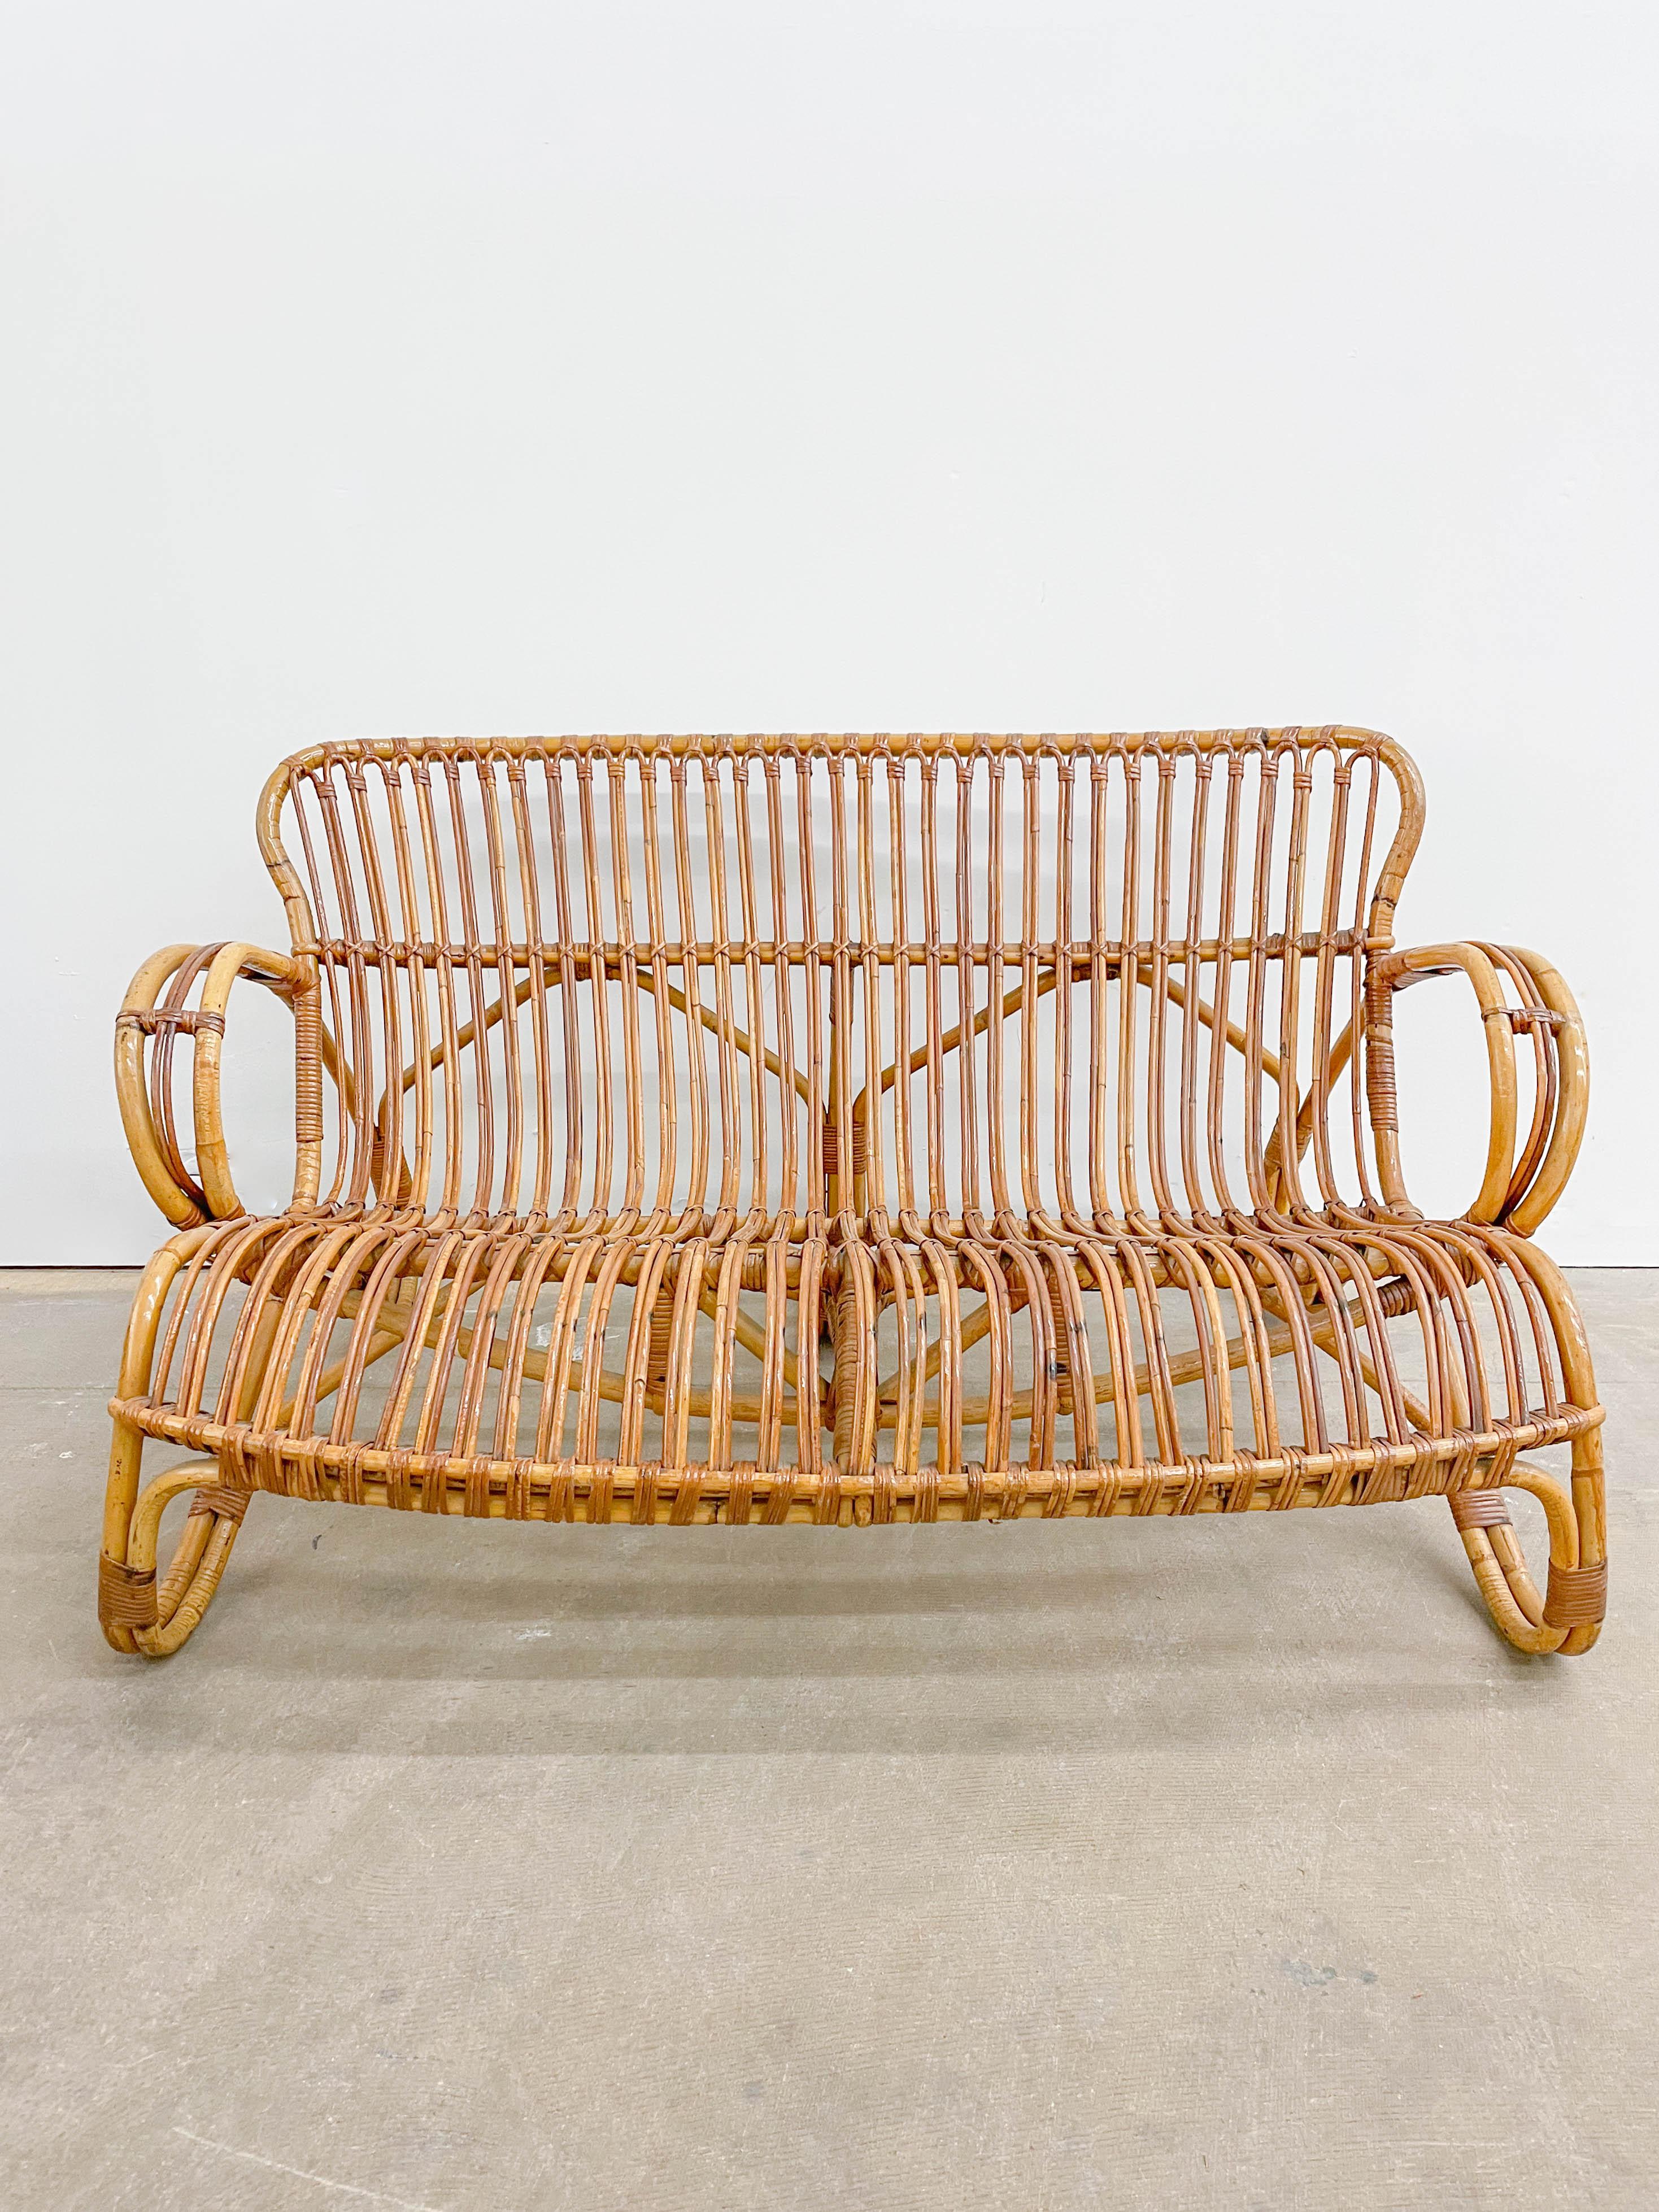 Beautifully meandering bentwood sofa with great sculptural quality by Rohe Noorwolde of the Netherlands. Expertly crafted and eye catching, this low loveseat offers lounge seating for a lighter person.
